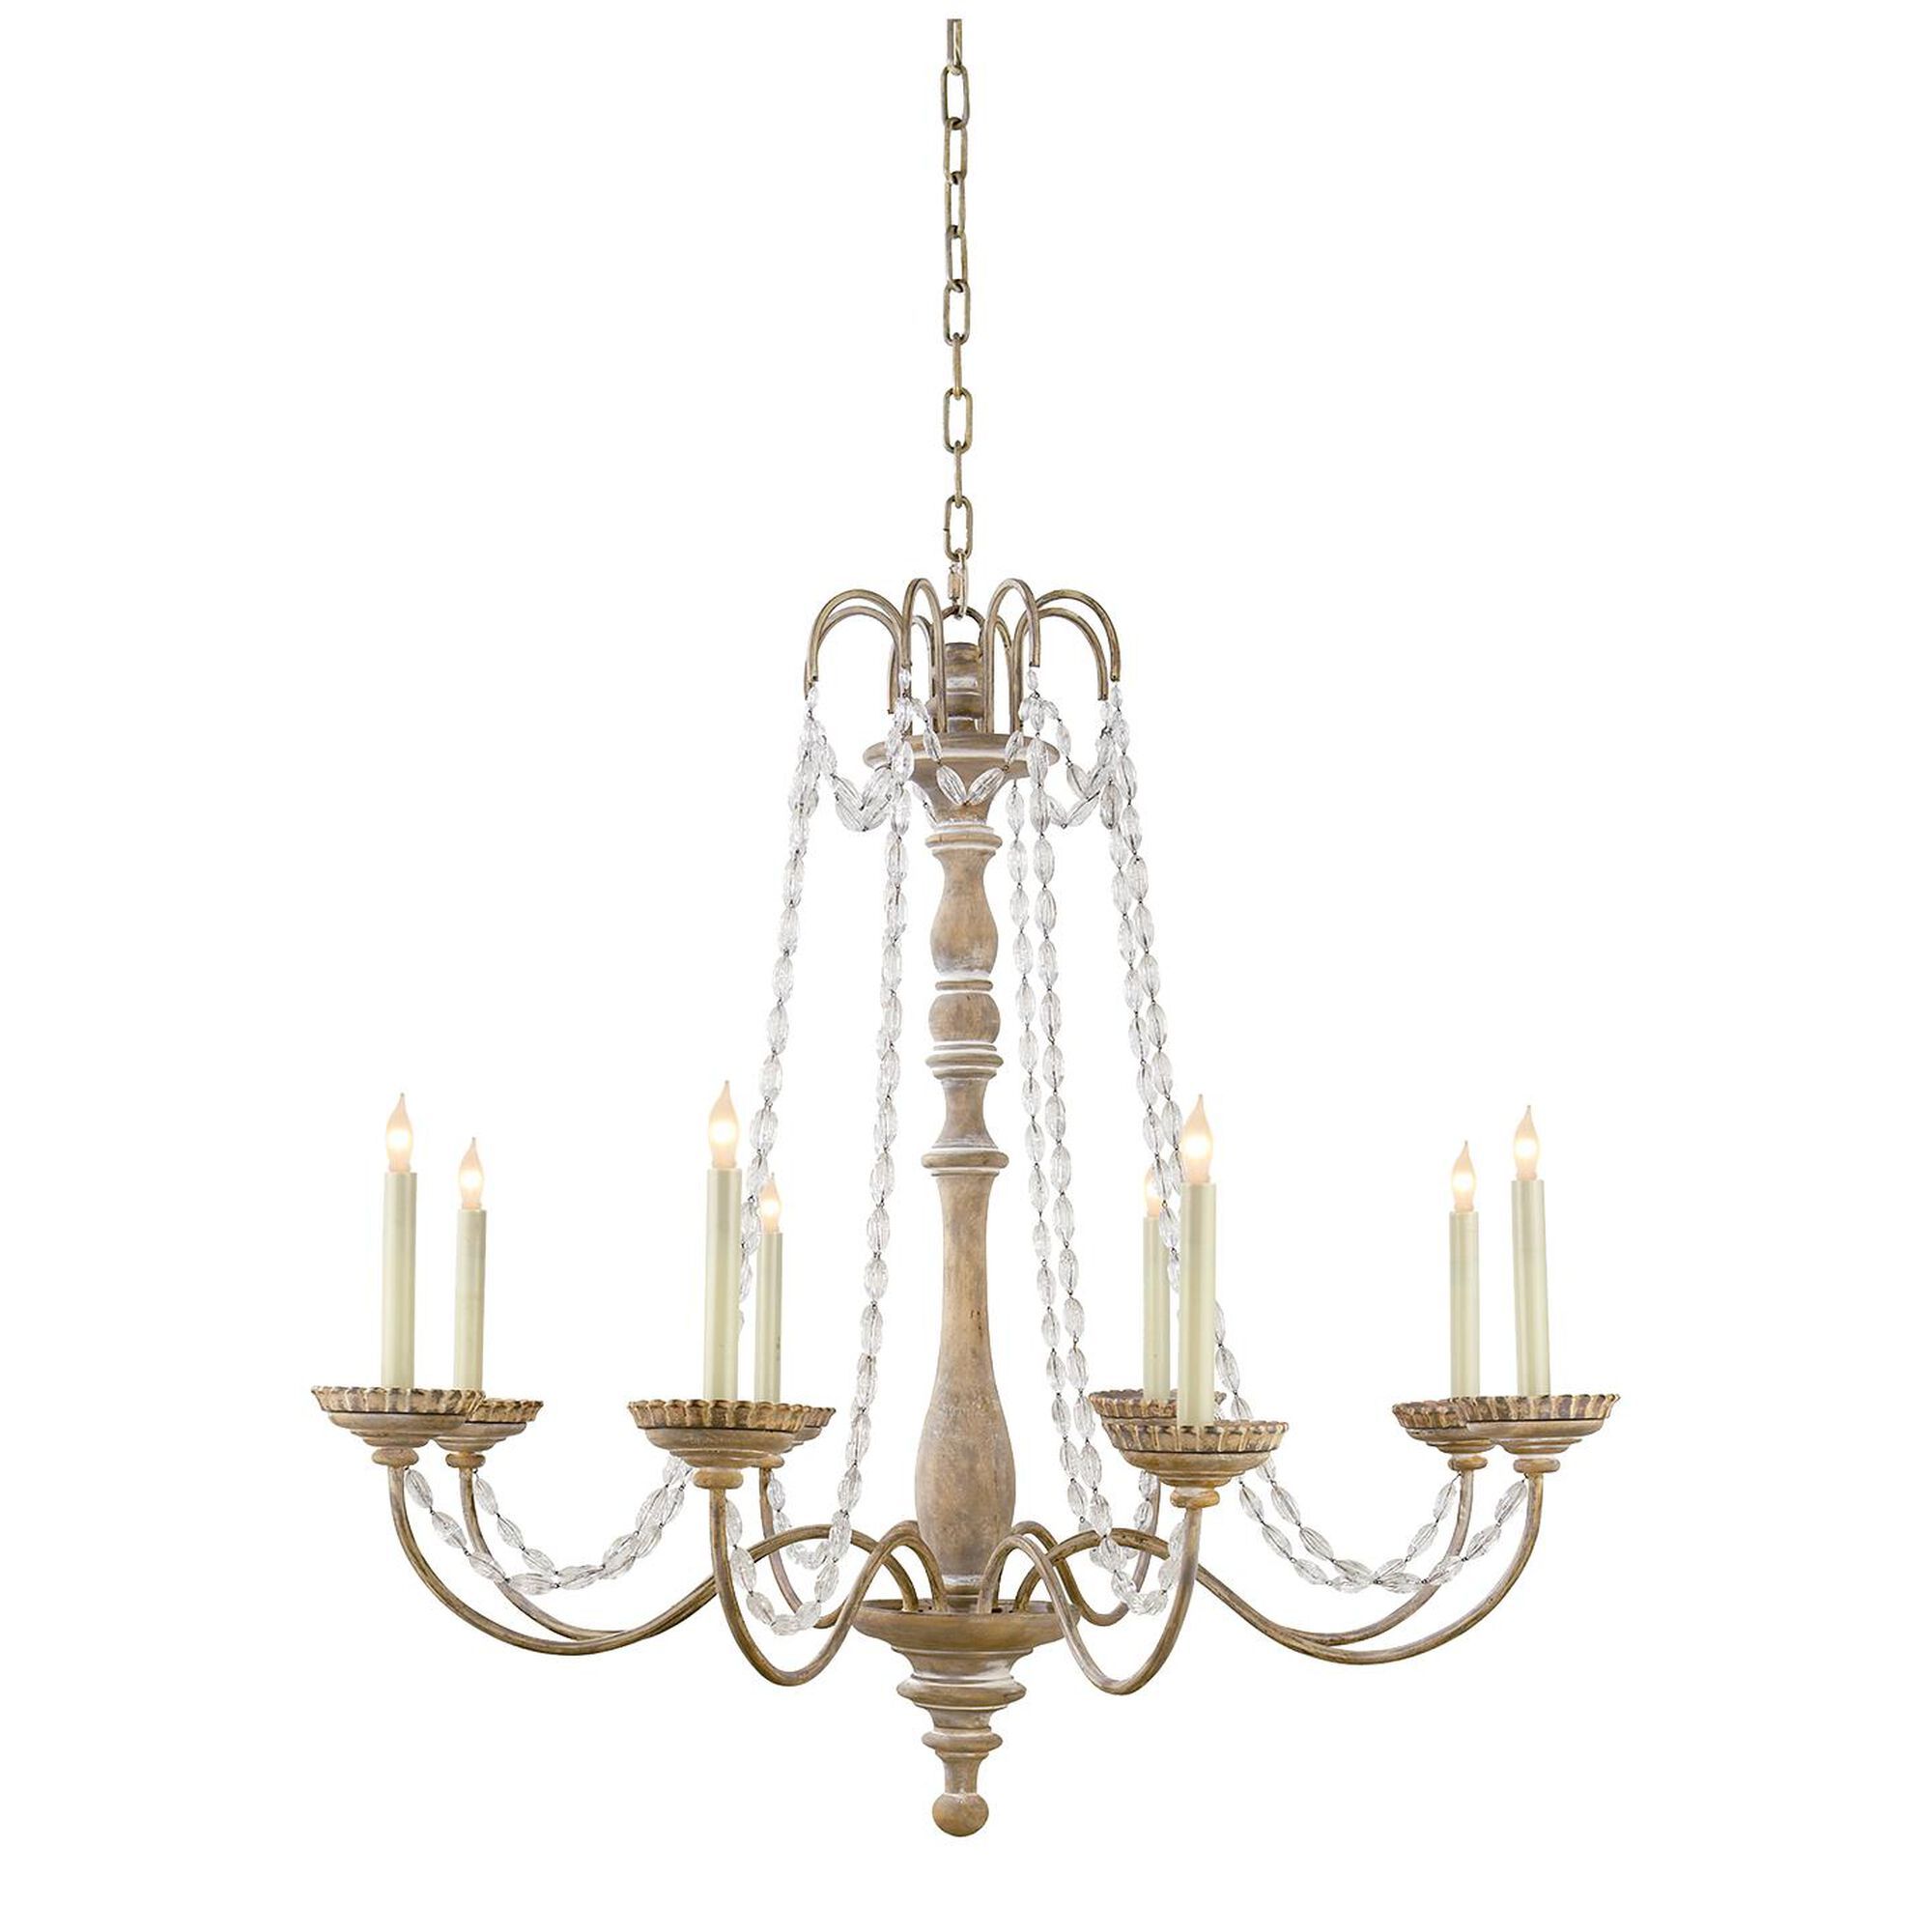 E. F. Chapman Flanders 36 Inch 8 Light Chandelier by Visual Comfort and Co. | Capitol Lighting 1800lighting.com